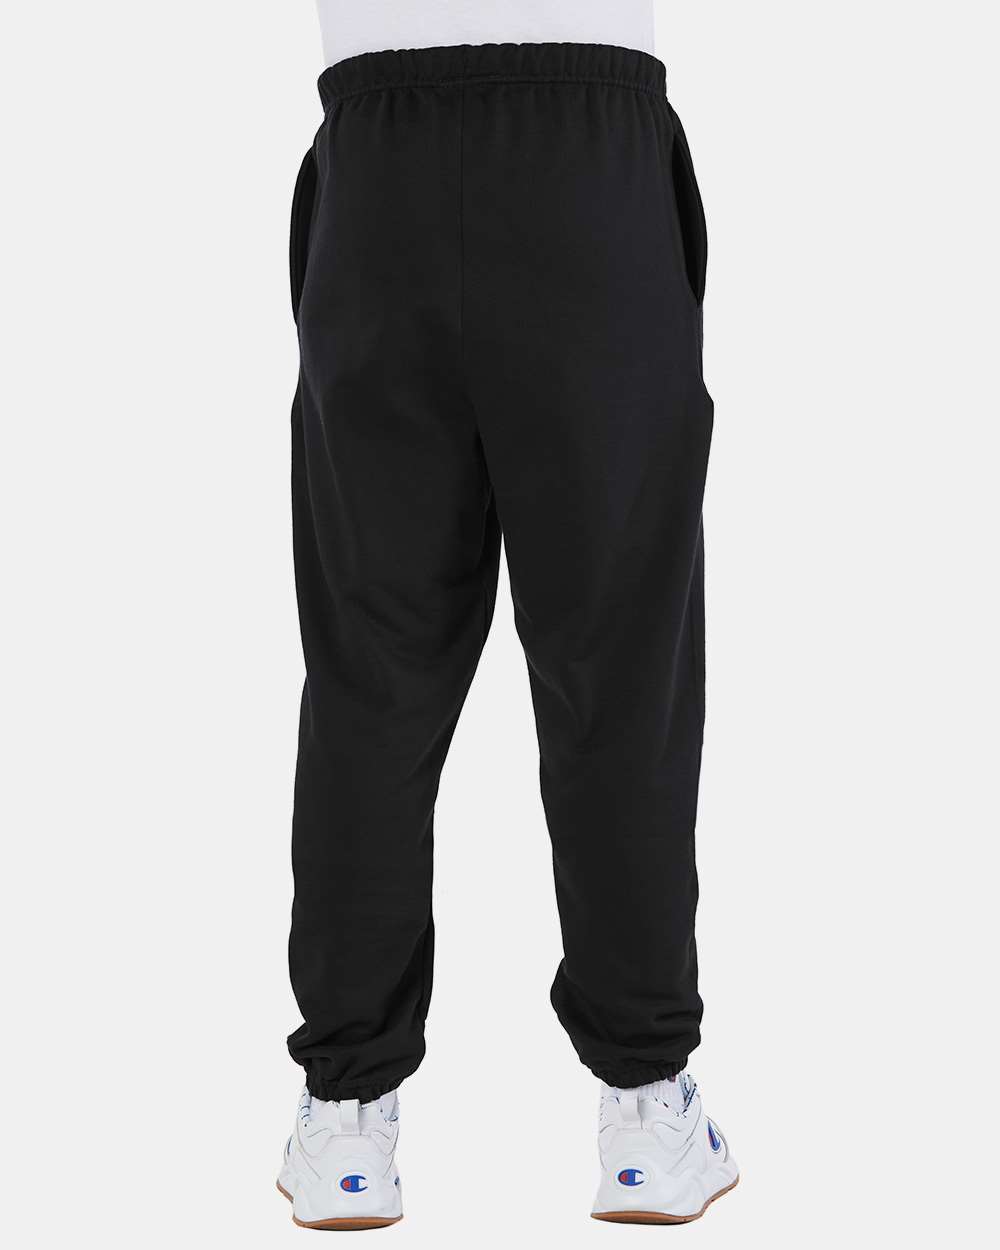 Champion Reverse Weave Sweatpants with Pockets RW10 S-3XL NEW